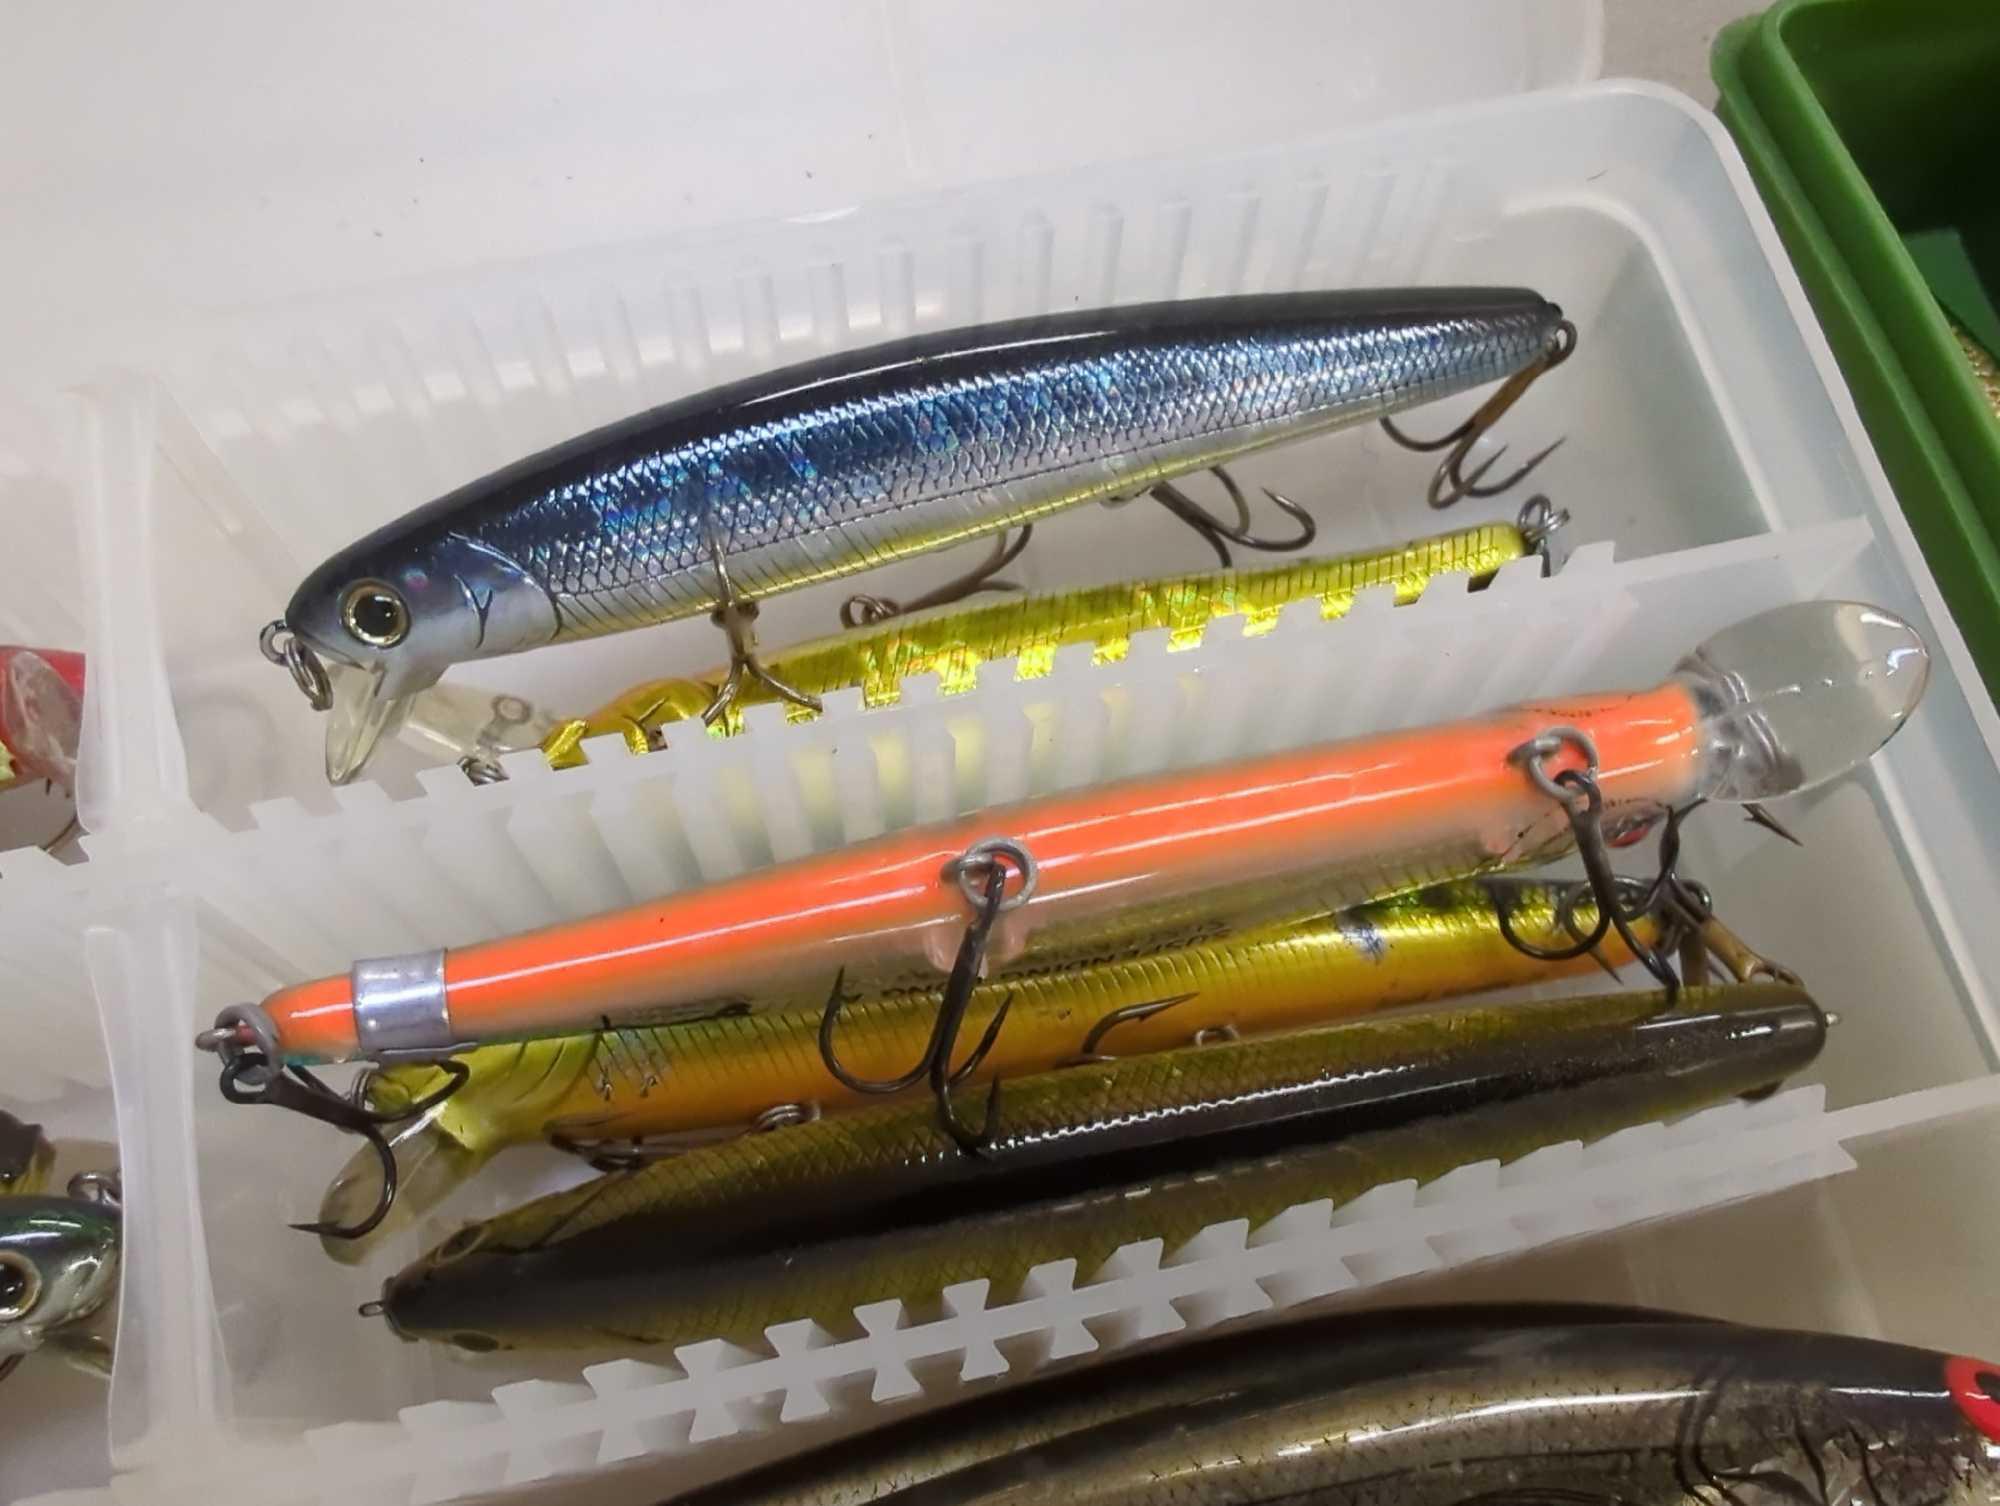 2 small tackle boxes containing fishing lures of similar style. Comes as is shown in photos. Appears